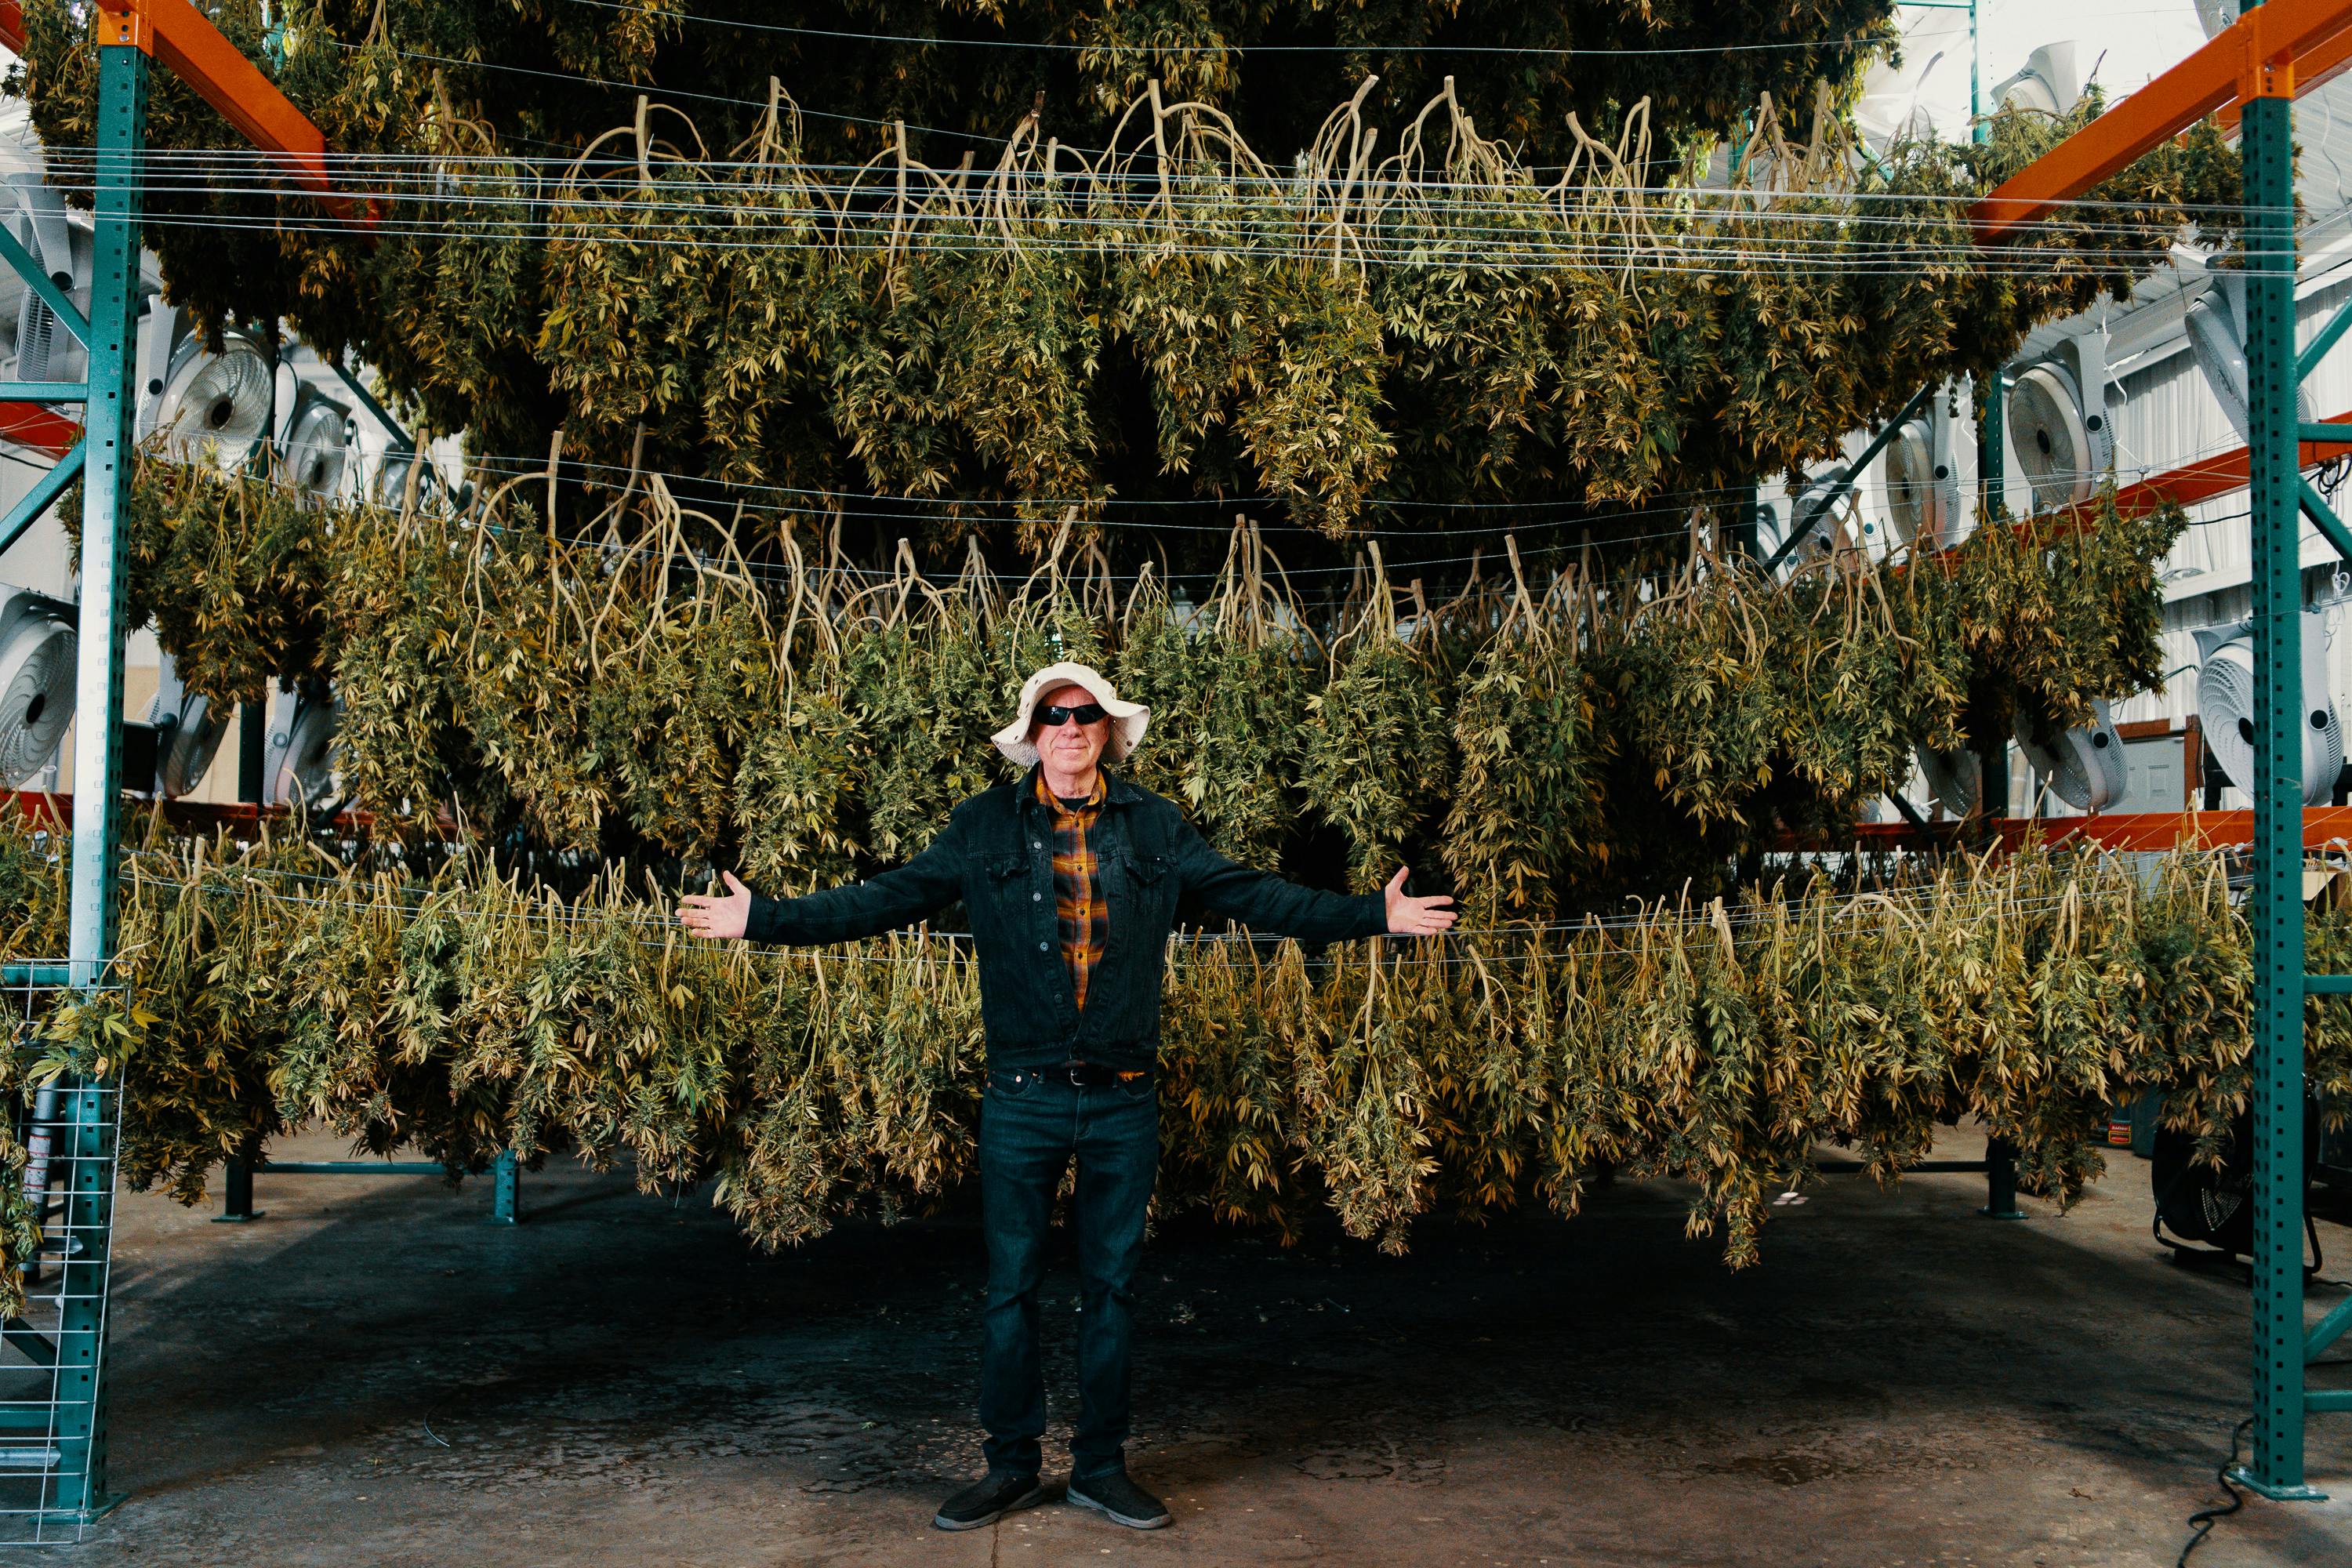 Ed Rosenthal is seen in front of cannabis plants